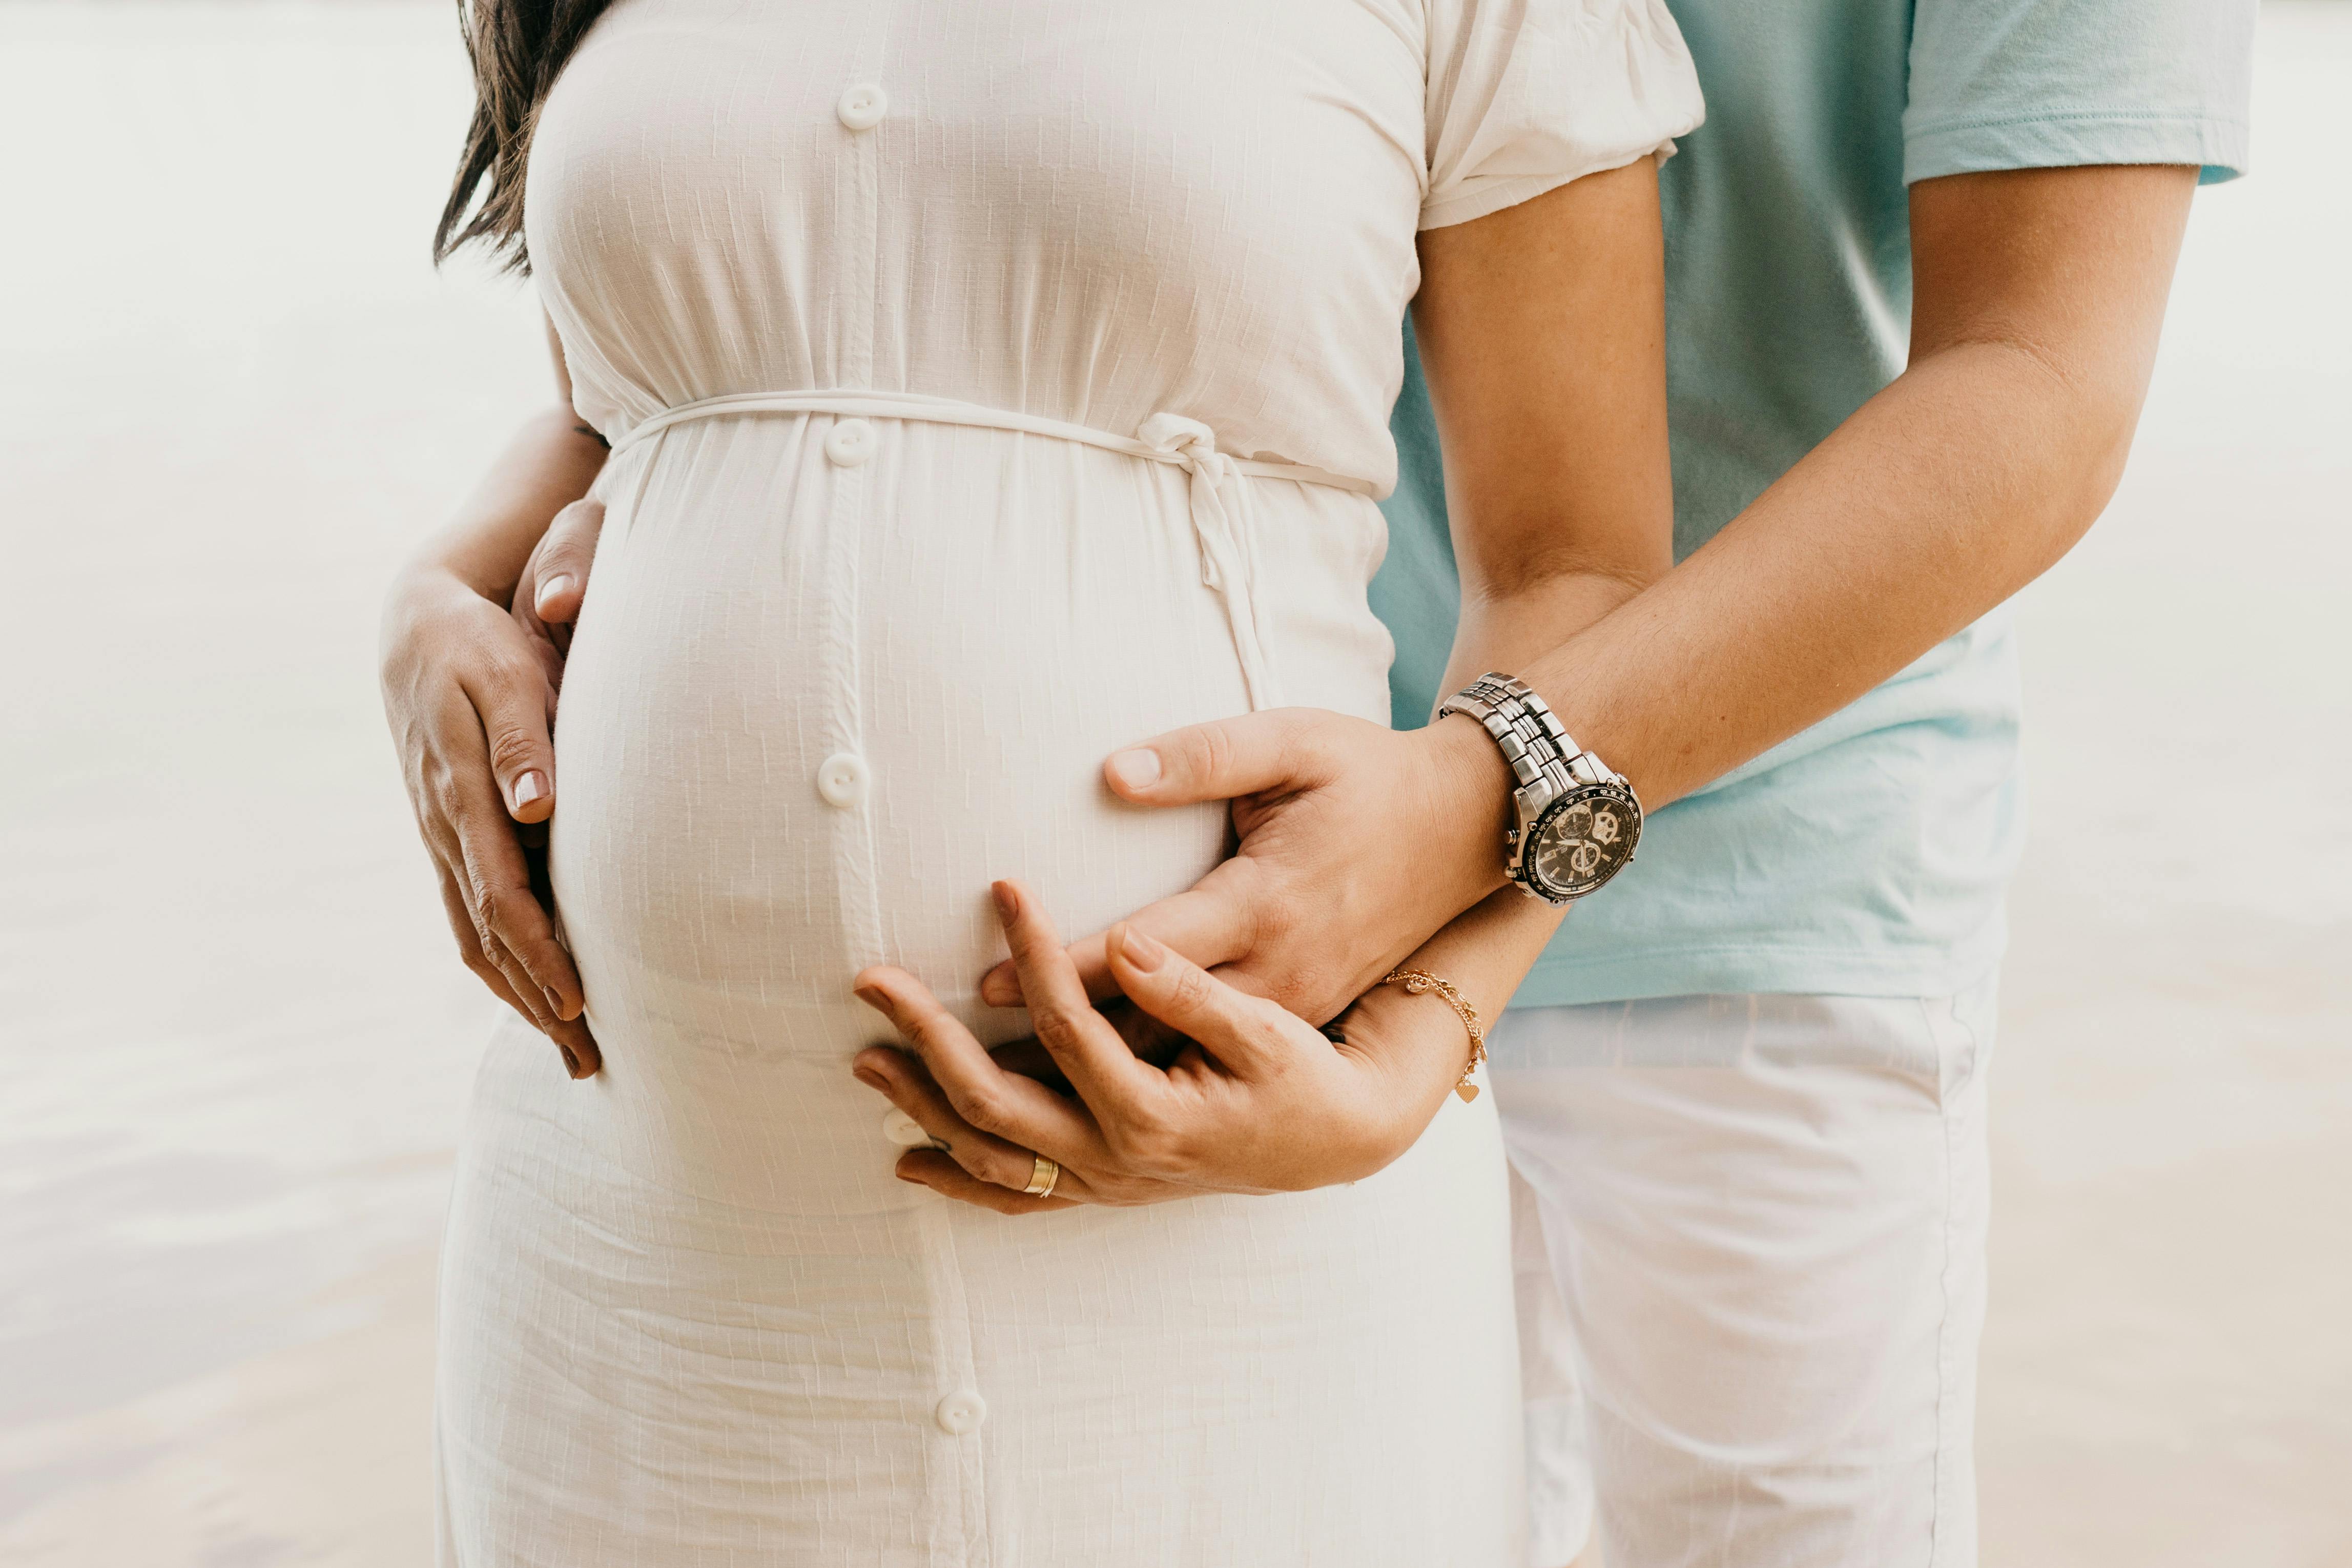 Pregnant woman embracing her tummy with her husband. | Photo: Pexels